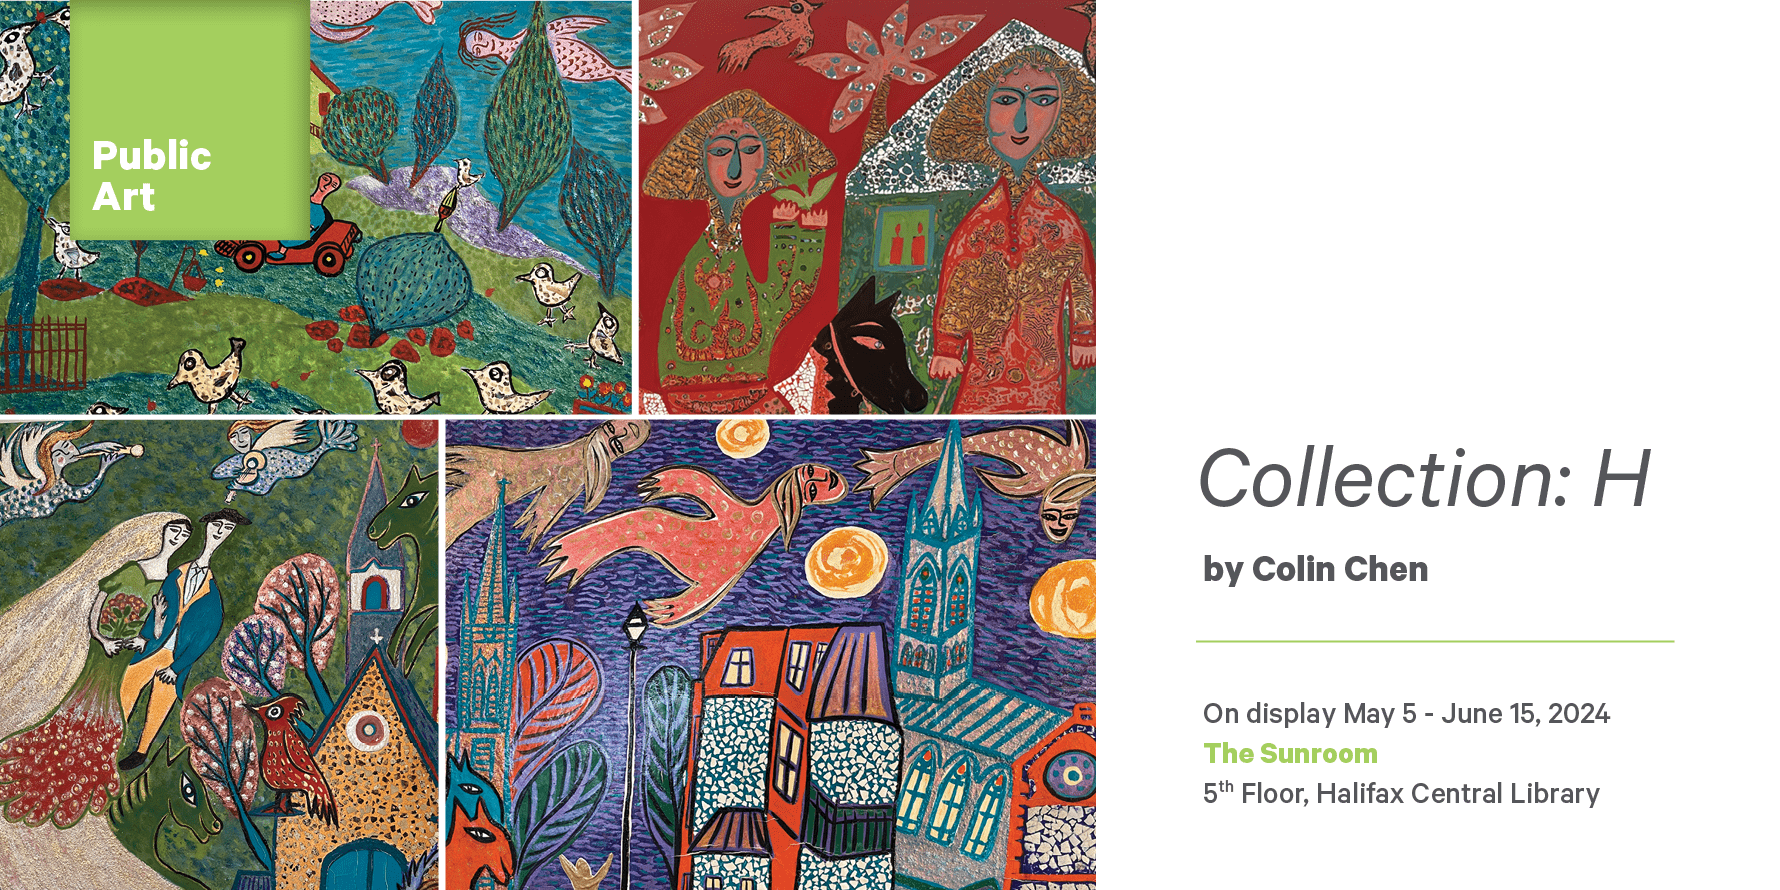 An assortment of folk style paintings are shown in a 4x4 grid. [Text] Collection: H by Colin Chen. On display May 5- June 15, 2024. The Sunroom, 5th Floor. Halifax Central Library.